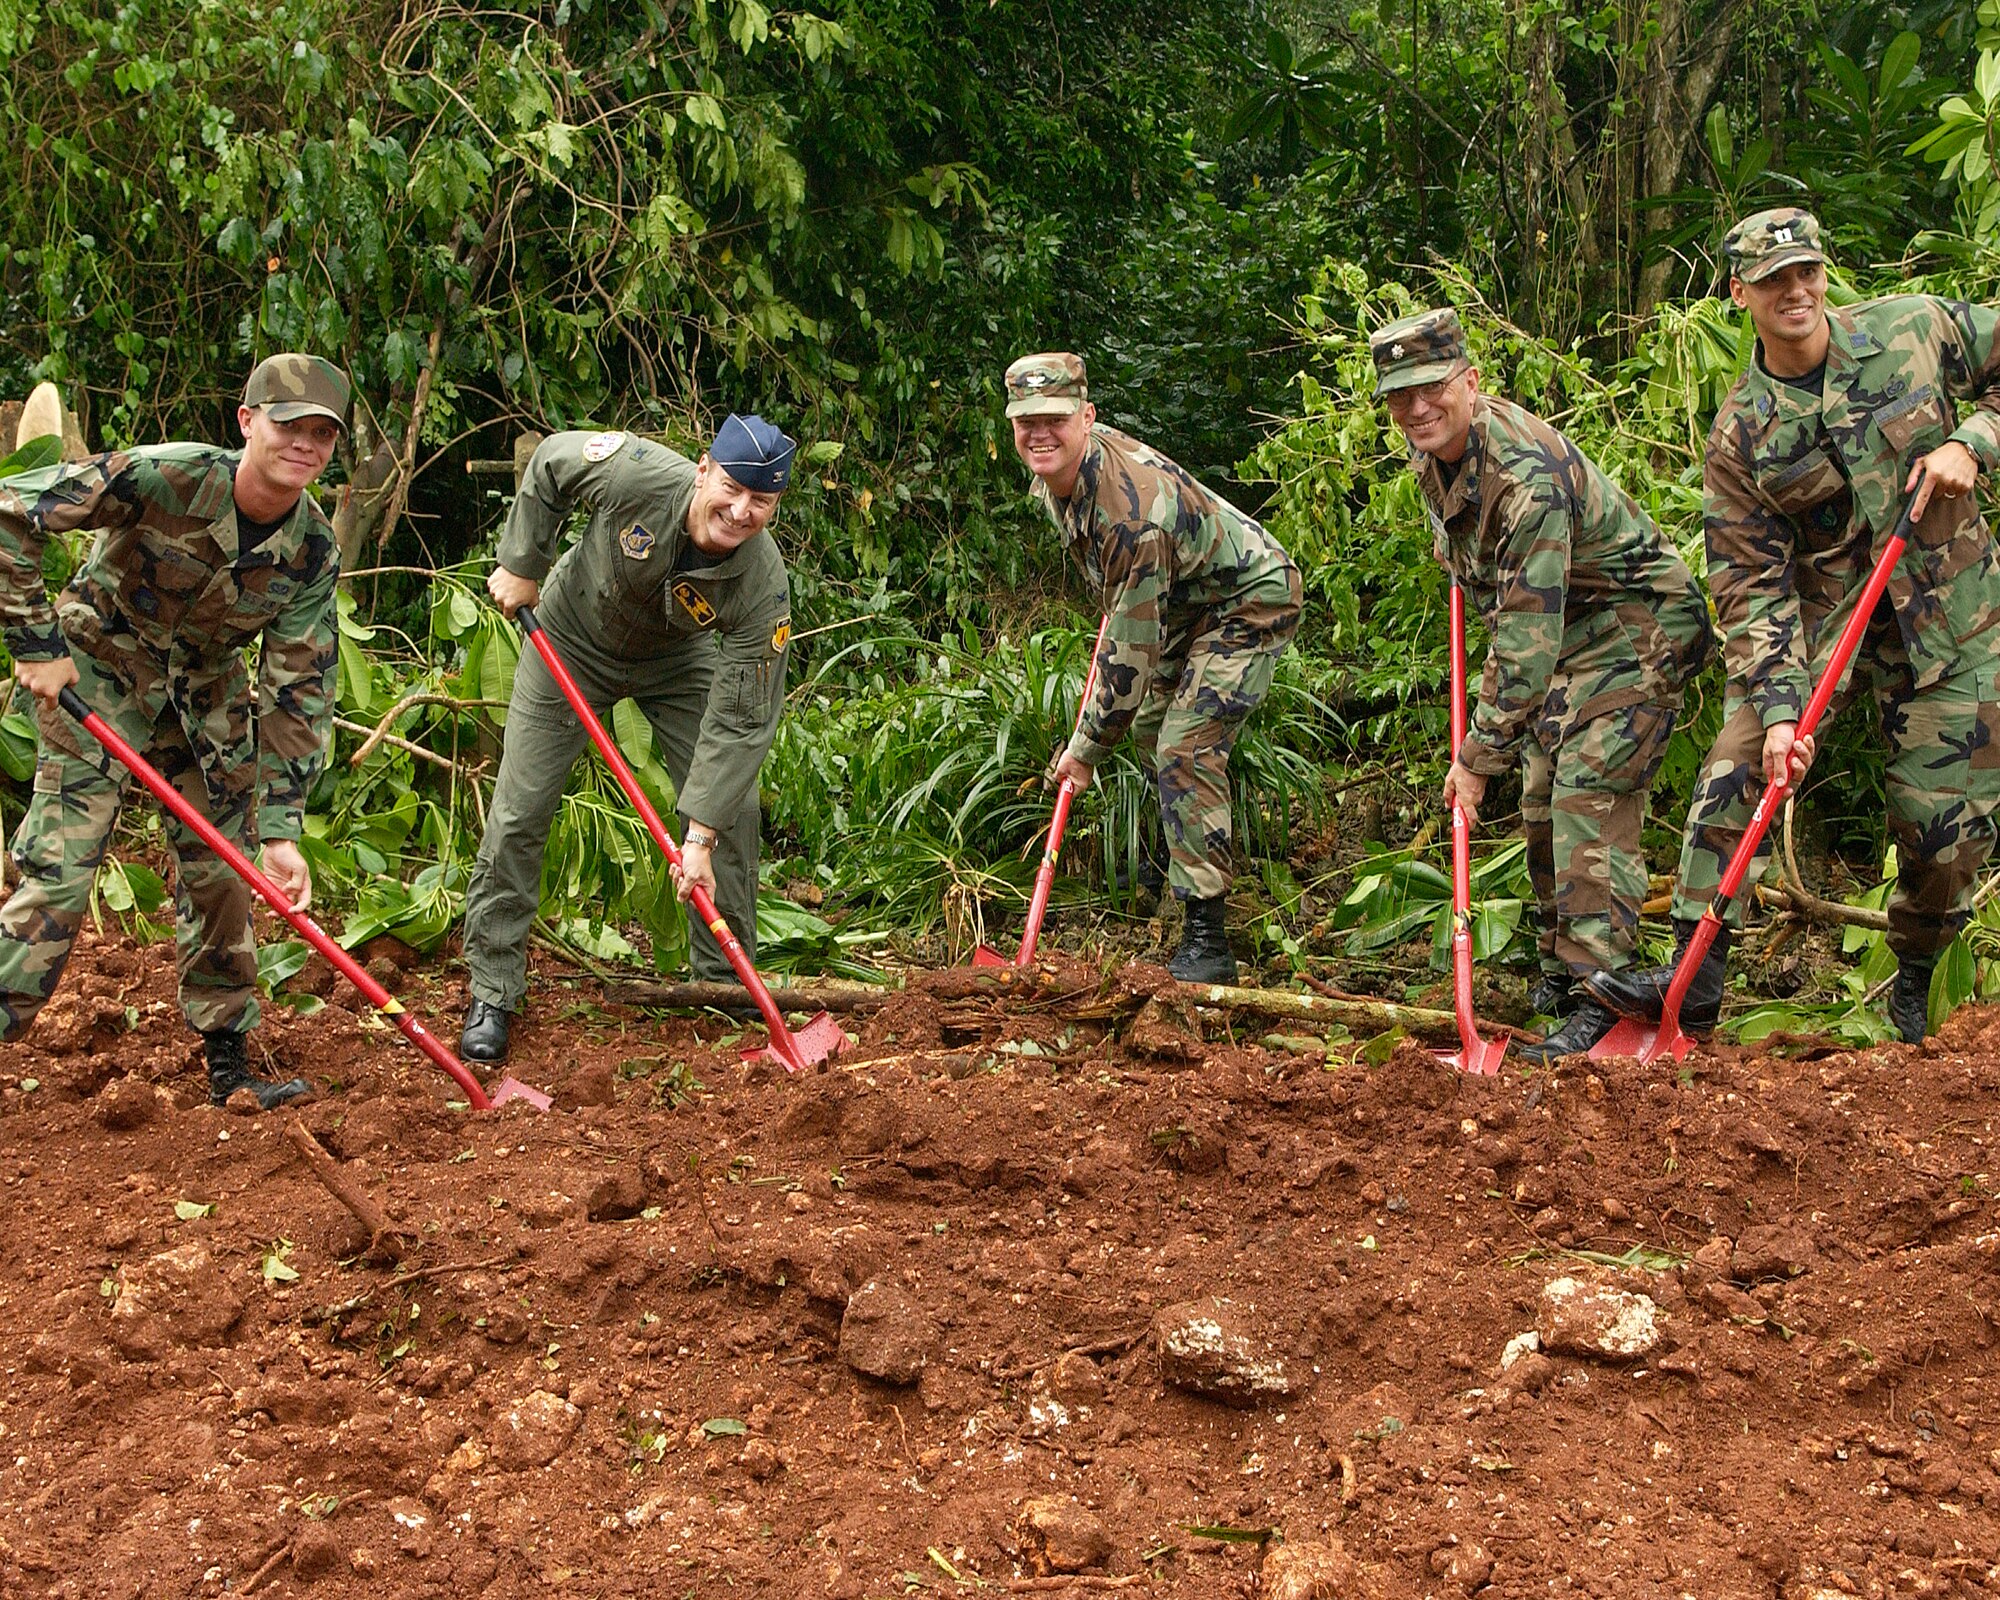 Airmen break ground at the new Northwest Field Expeditionary Combat Support Training Campus site at Andersen Air Force Base, Guam Oct. 11. The entire complex will cost approximately $240 million and will be fully operational by 2016. In addition to housing the RED HORSE, the campus will also be home to Combat Communications, Commando Warrior and Silver Flag. From left: Airman Jeremy Rich, 554th Rapid Engineer Deployable Heavy Operation Repair Squadron Engineers; Col. Michael Boera, 36th Wing commander; Col. William Corson, Pacific Air Forces director of installation and mission support; Lt. Col. Keith Albrecht, 36th Contingency Response Group vice commander; and Capt. Craig Thomas, 554th RED HORSE Squadron officer in charge. (U.S. Air Force photo/Airman 1st Class Daniel Owen)